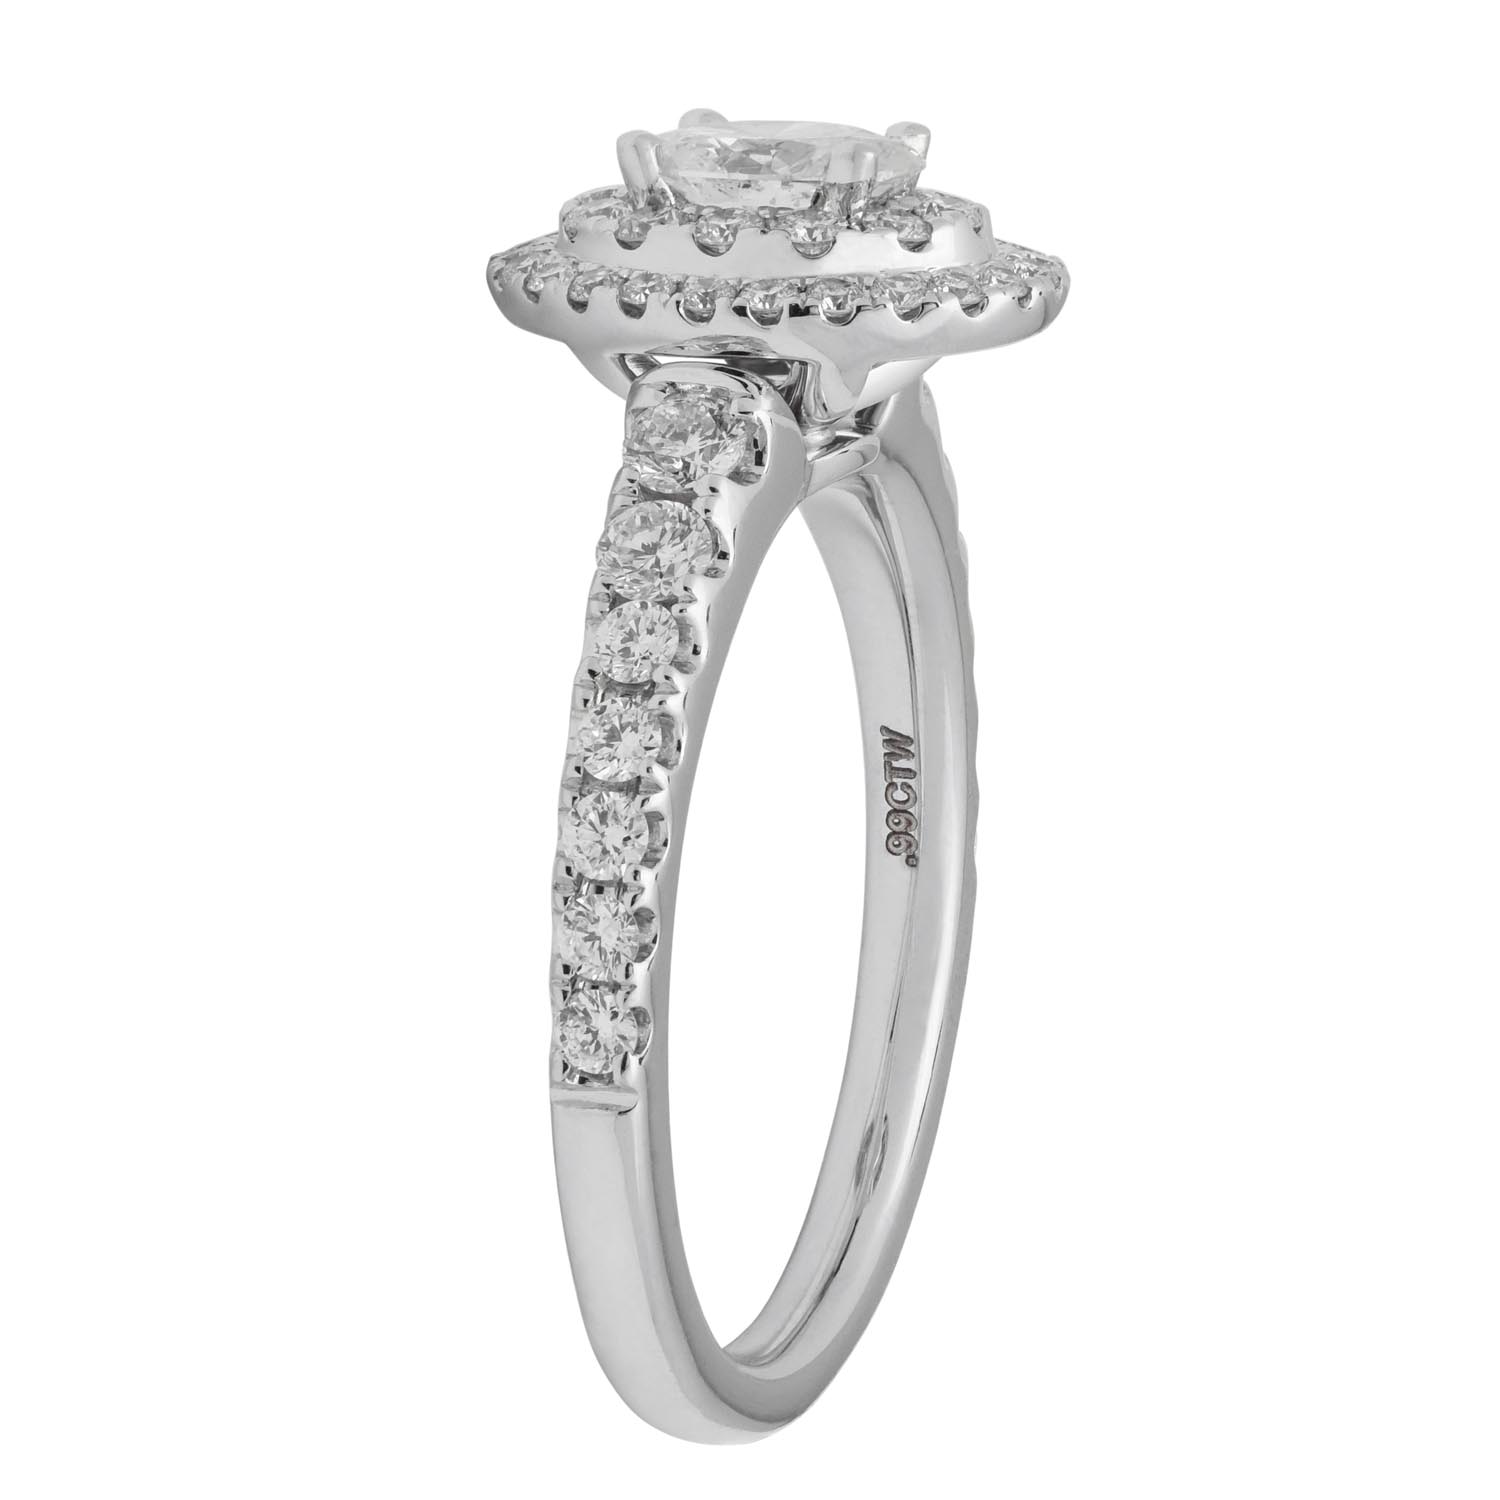 Northern Star Oval Diamond Halo Engagement Ring in 14kt White Gold (1ct tw)